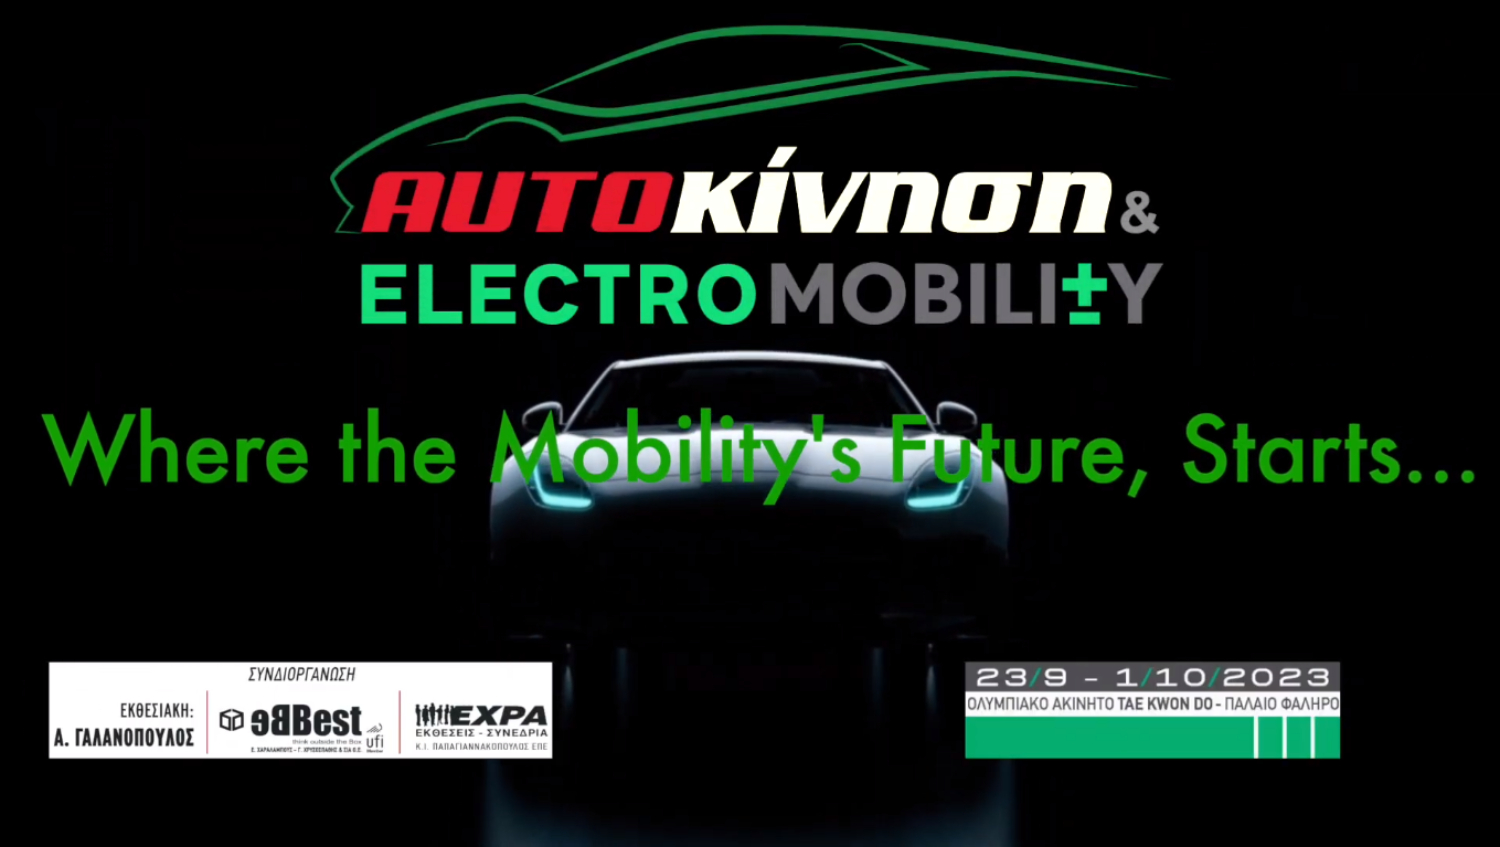 aftokinisi-electromobility-2023-charge-up-your-ride-668388